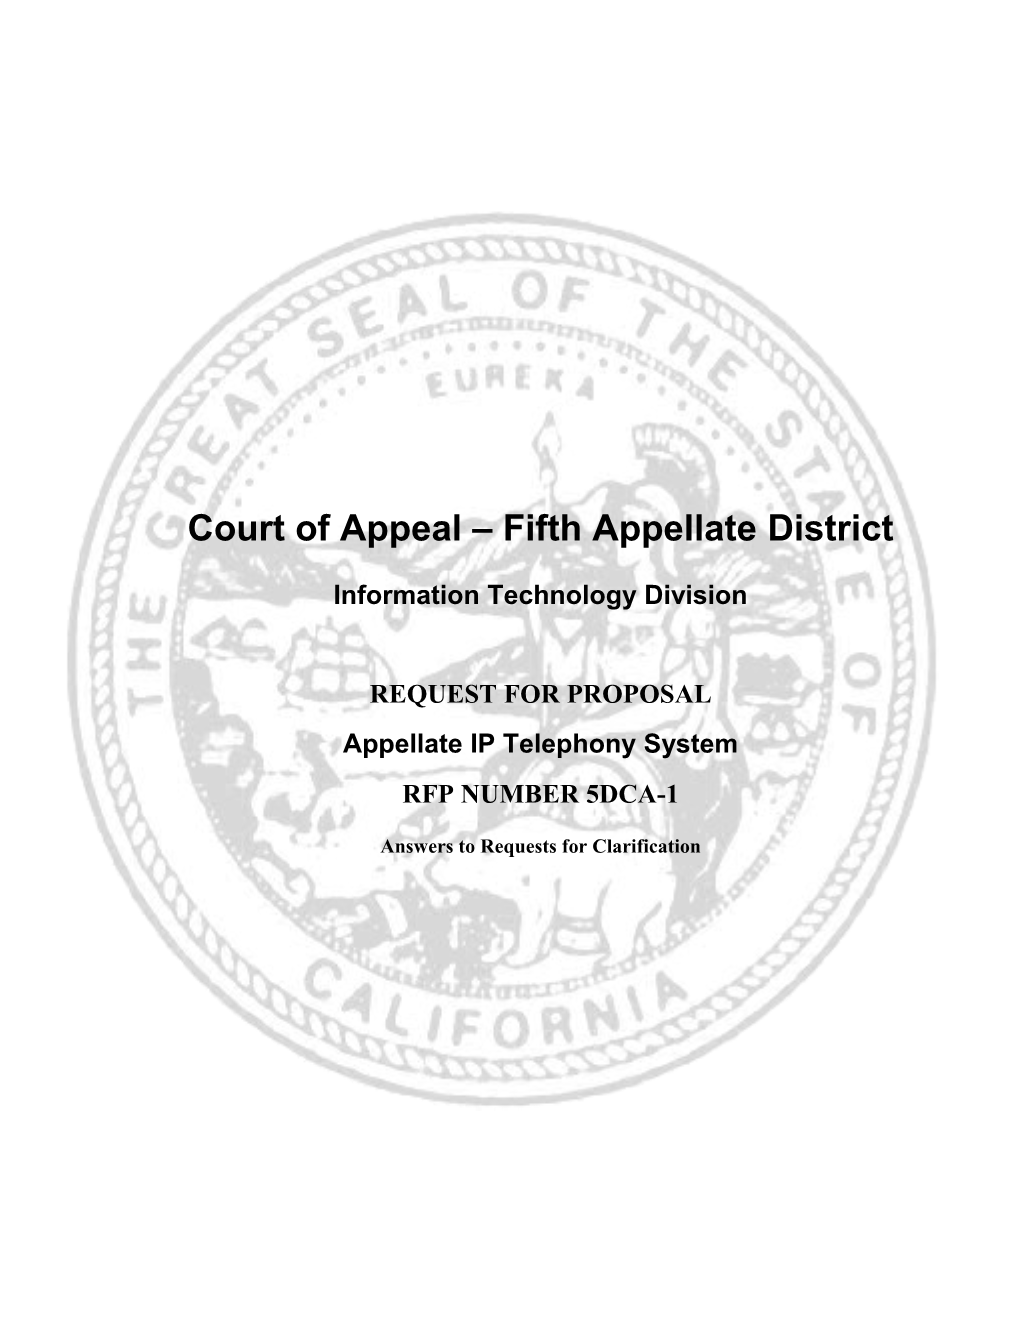 Court of Appeal Fifth Appellate District